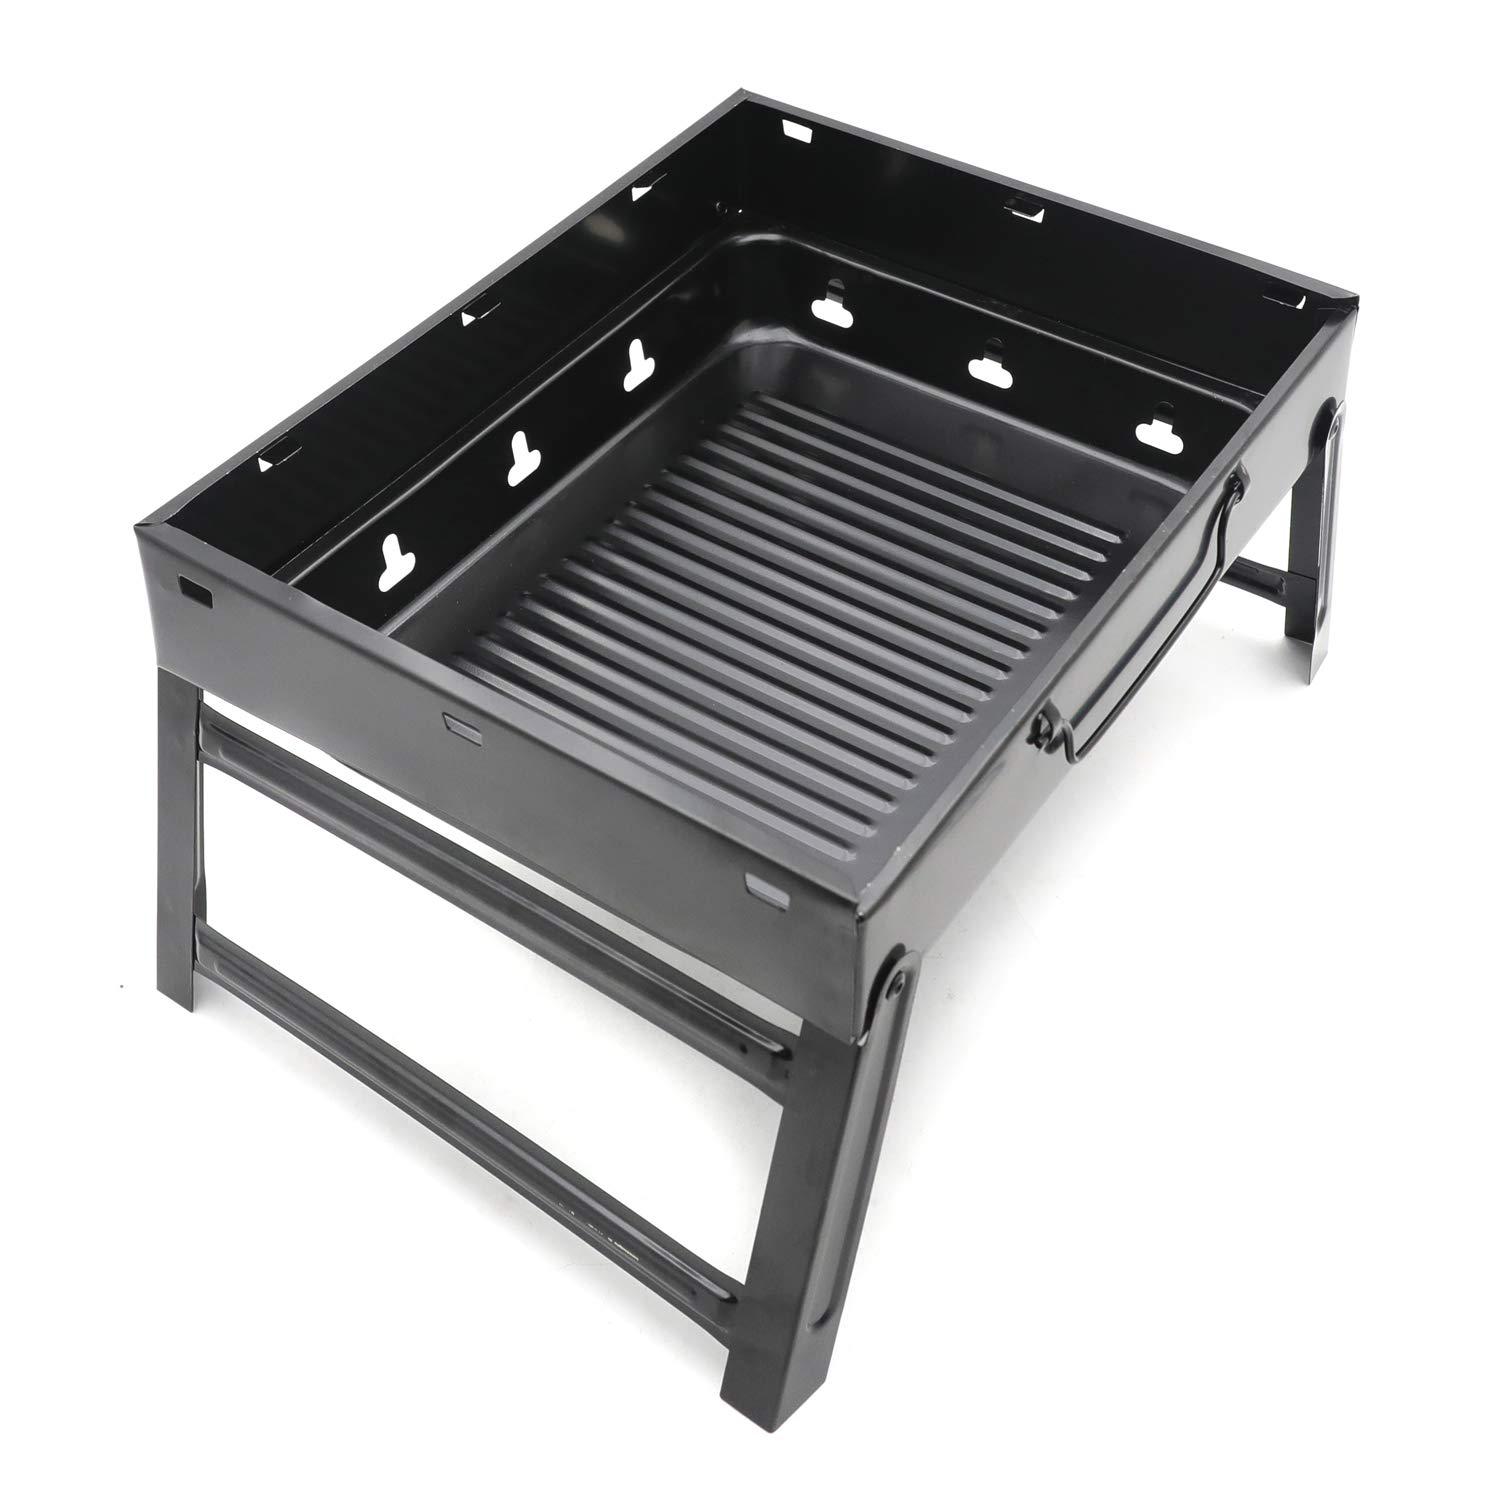 xkh- tabletop bbq folding barbecue grill portable charcoal stove shish kabob camping cooking picnic outdoor (14inch) [p/n: et